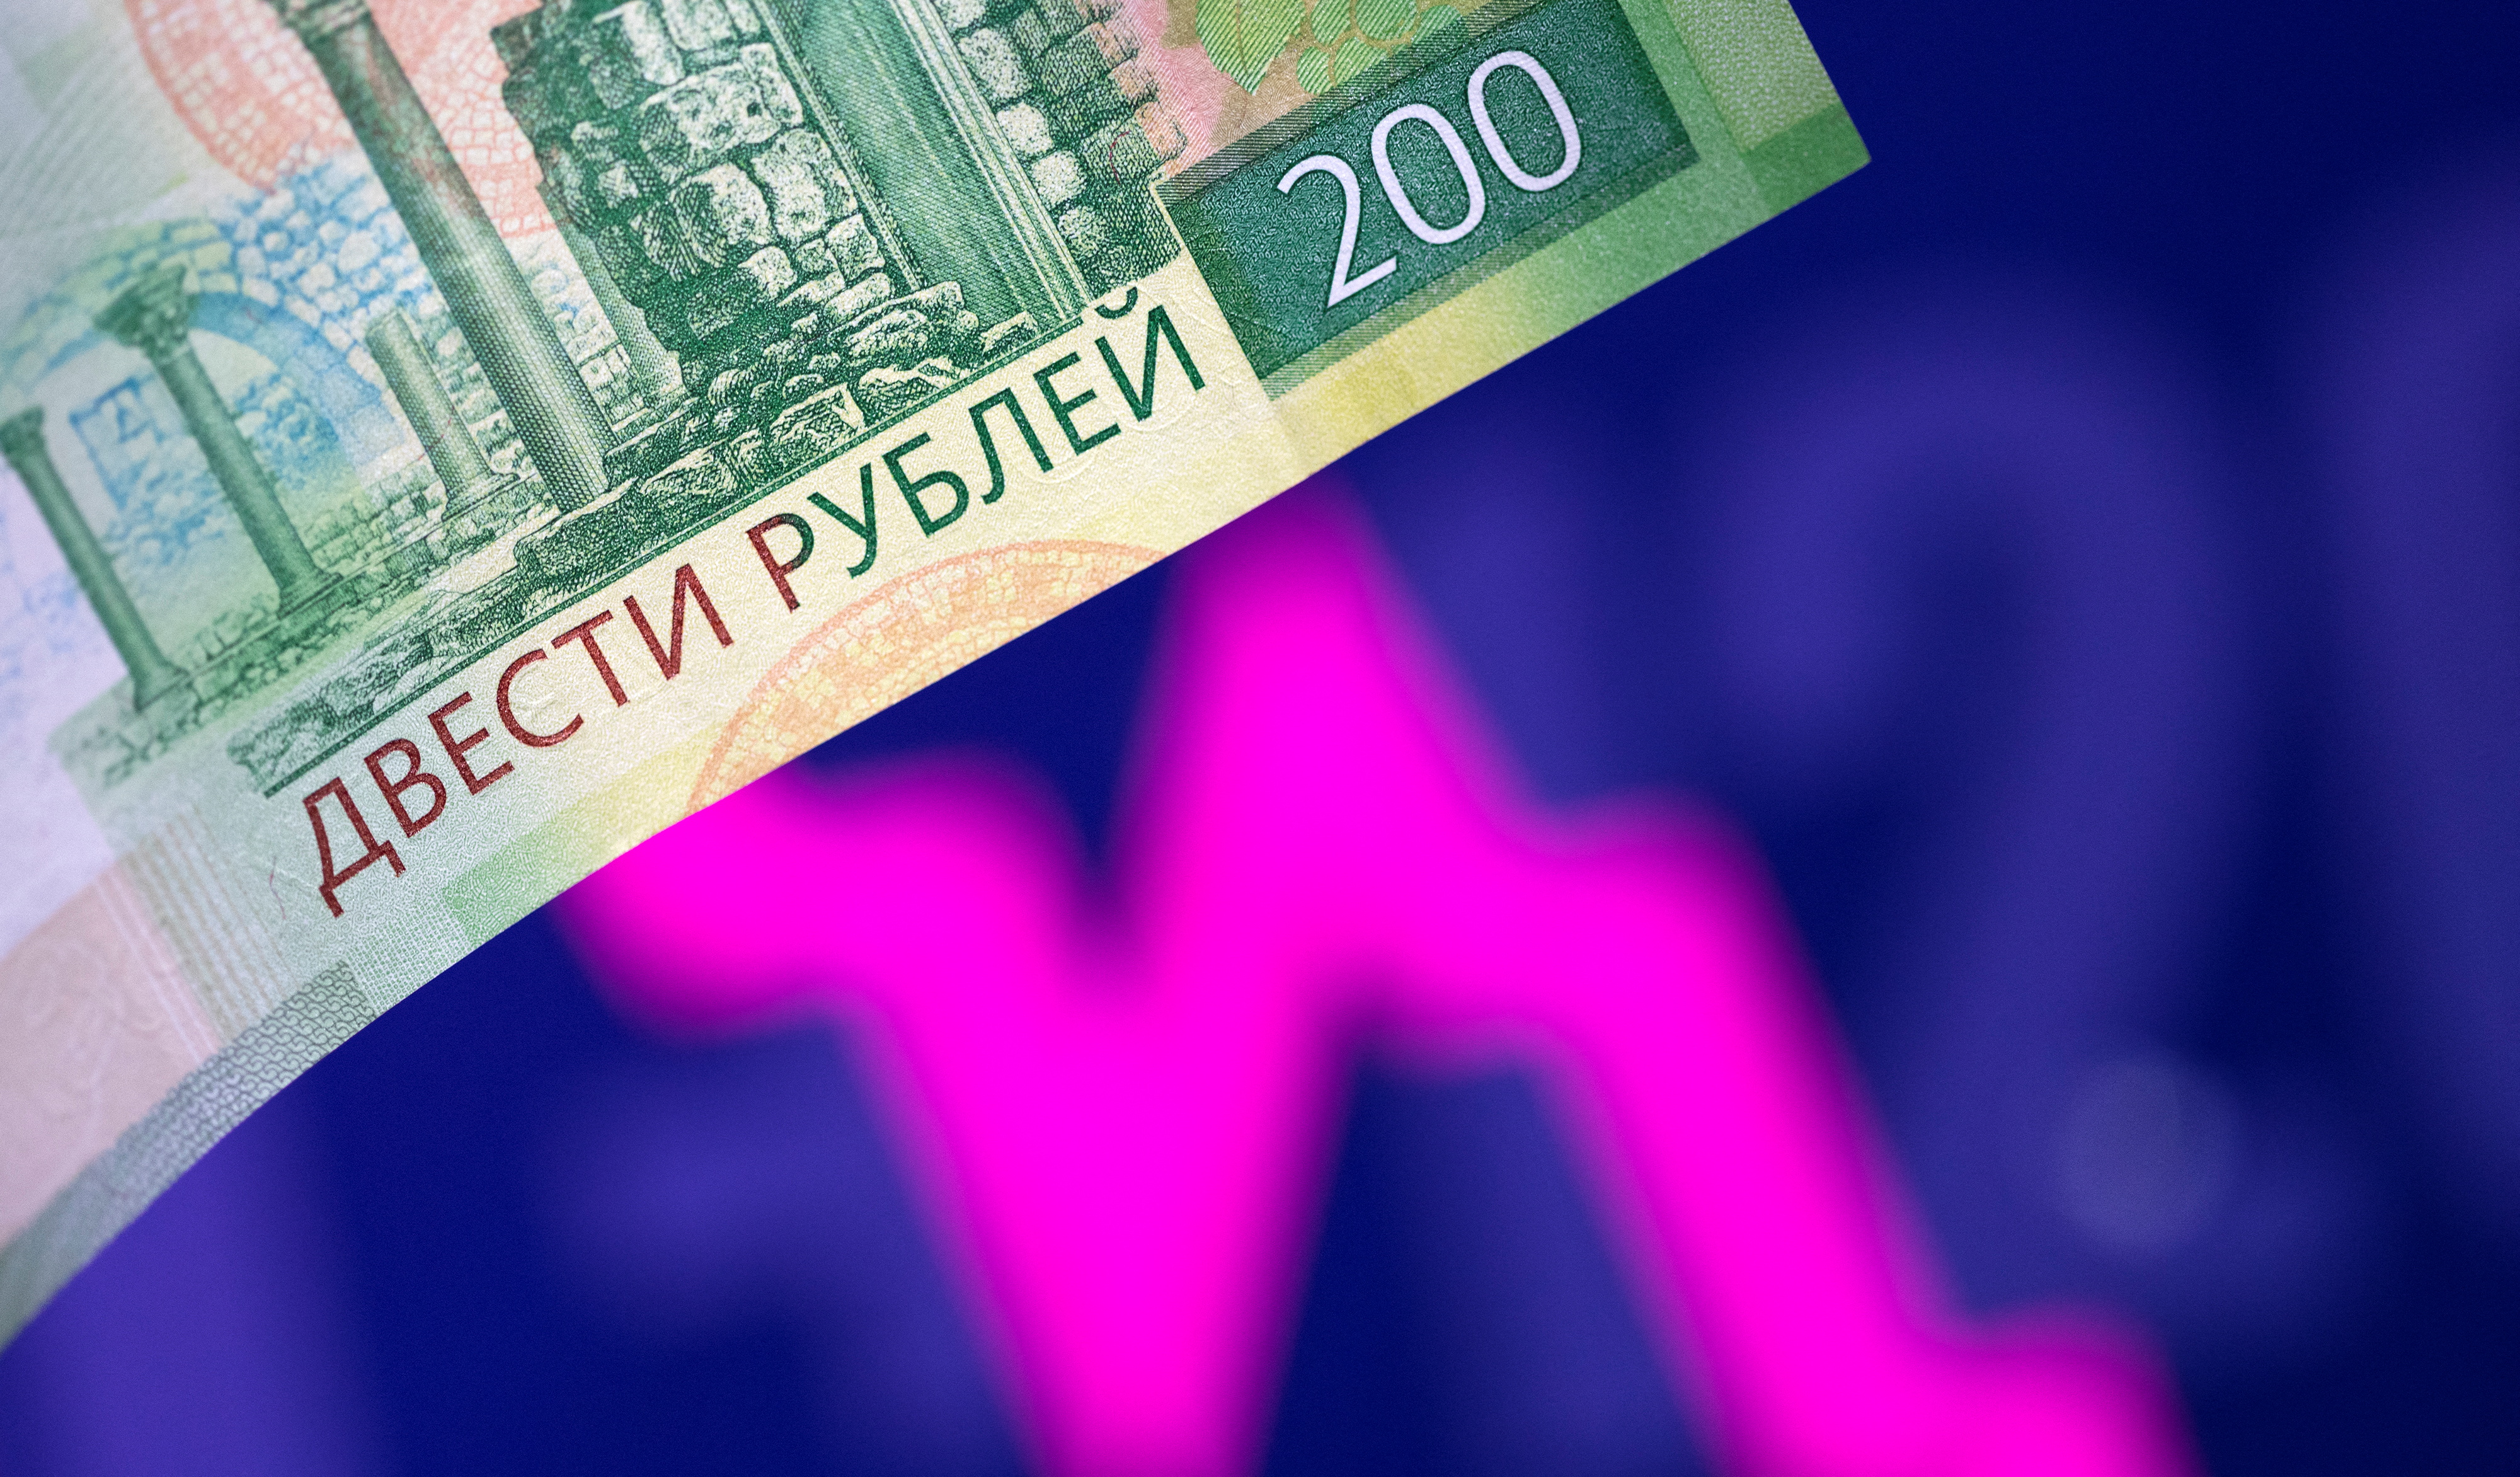 Illustration shows a Russian rouble banknote and a descending stock graph